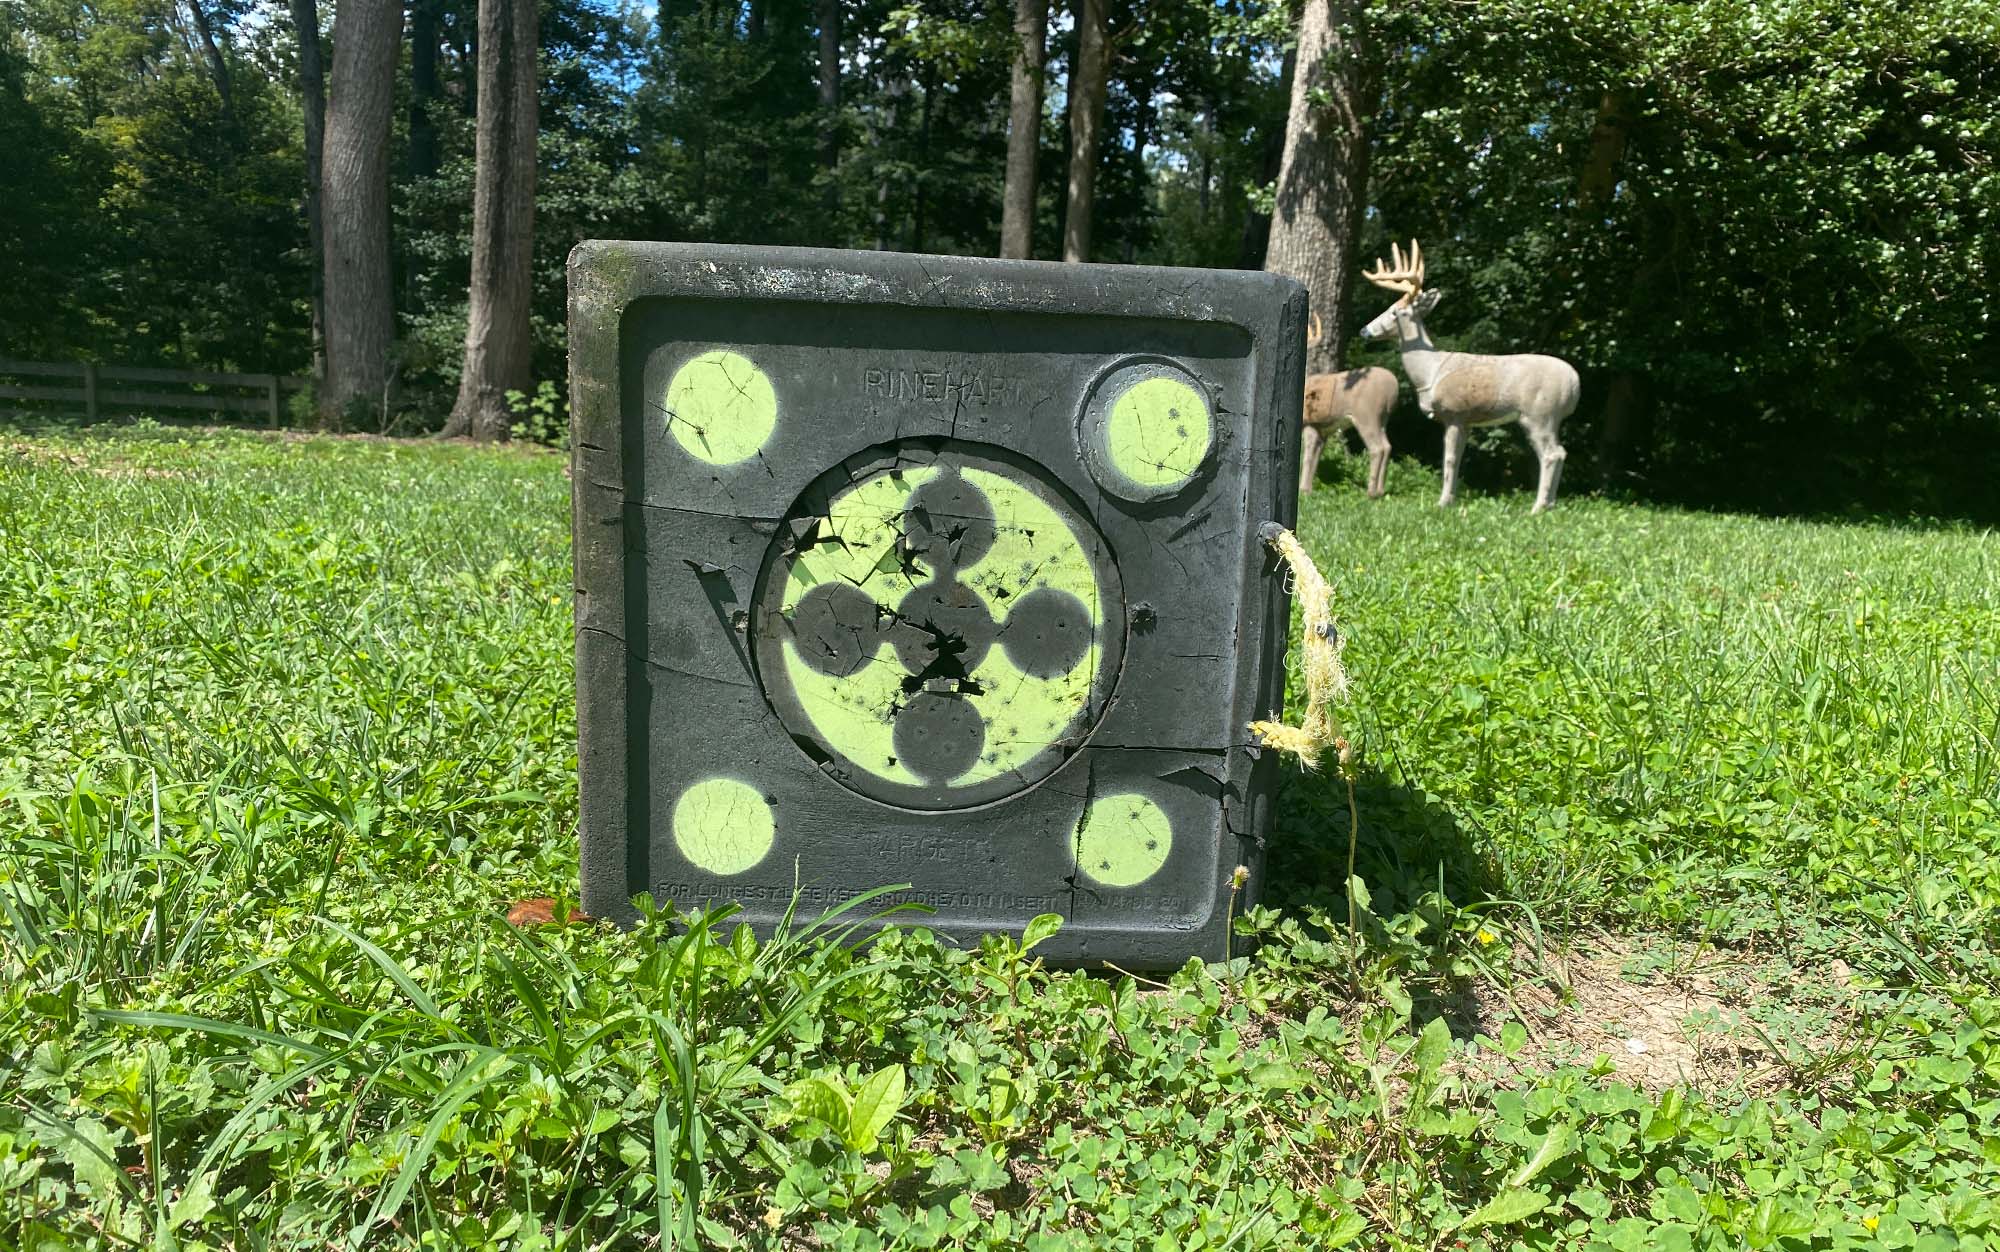 YAK Archery Target for Archery from 2022 Improved Processing  Interchangeable Slats 60 x 60 x 20 cm